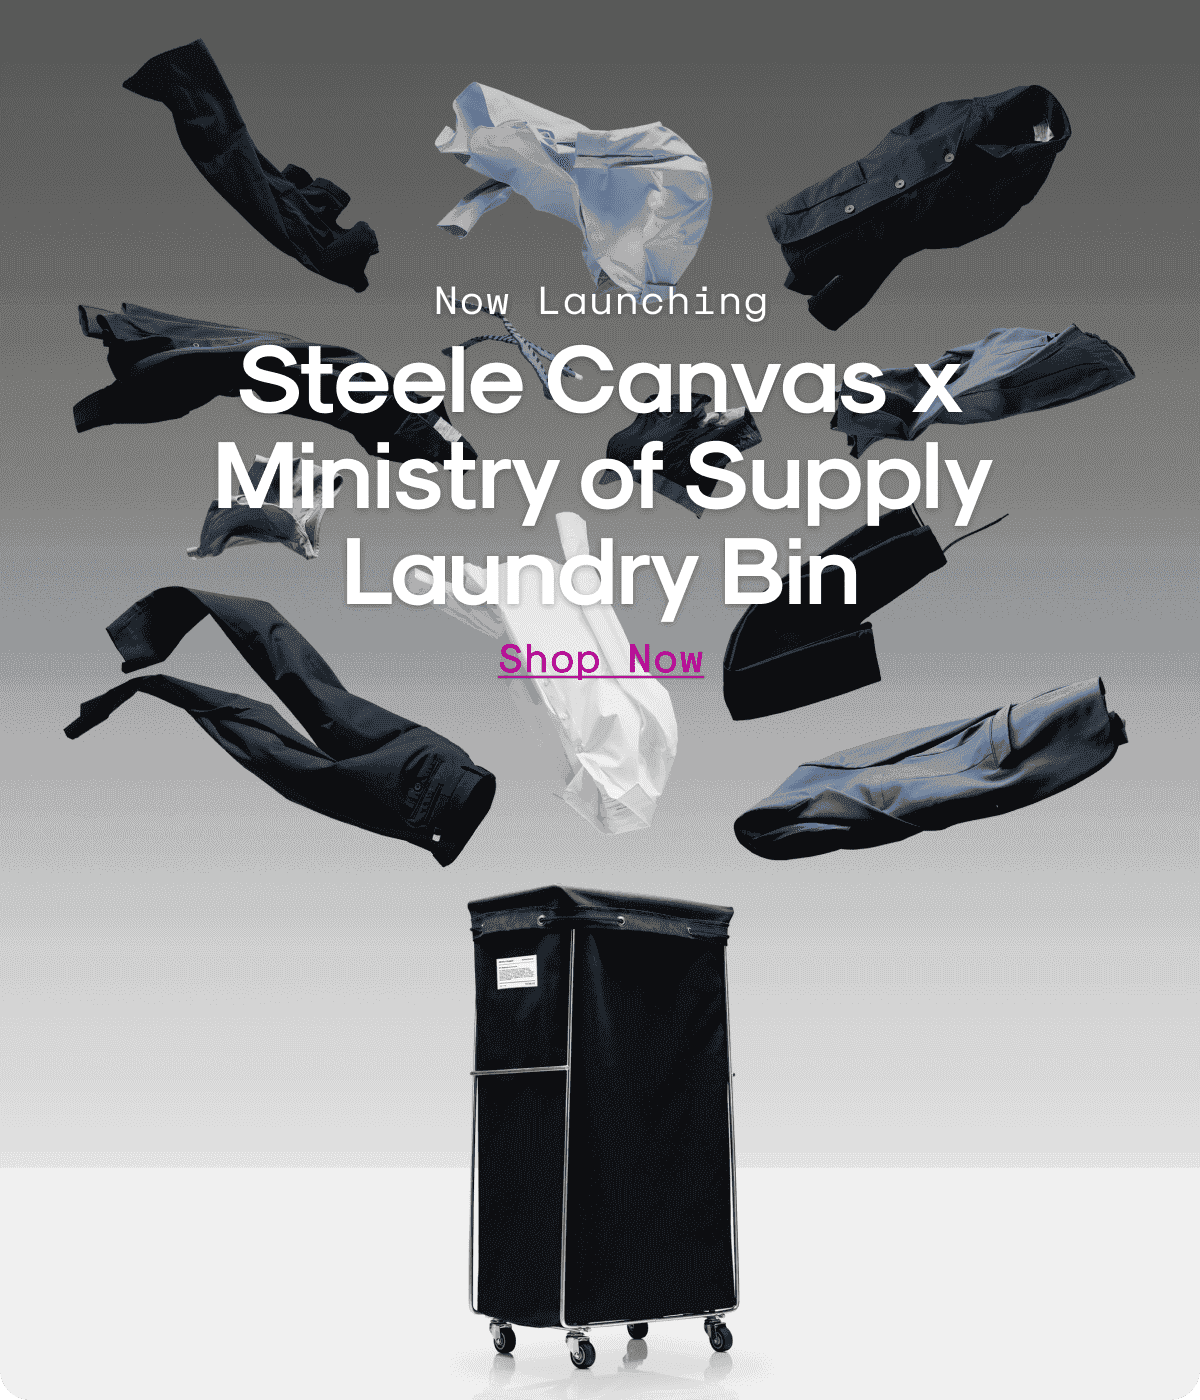 Now Launching: Steele Canvas x Ministry of Supply Laundry Bin